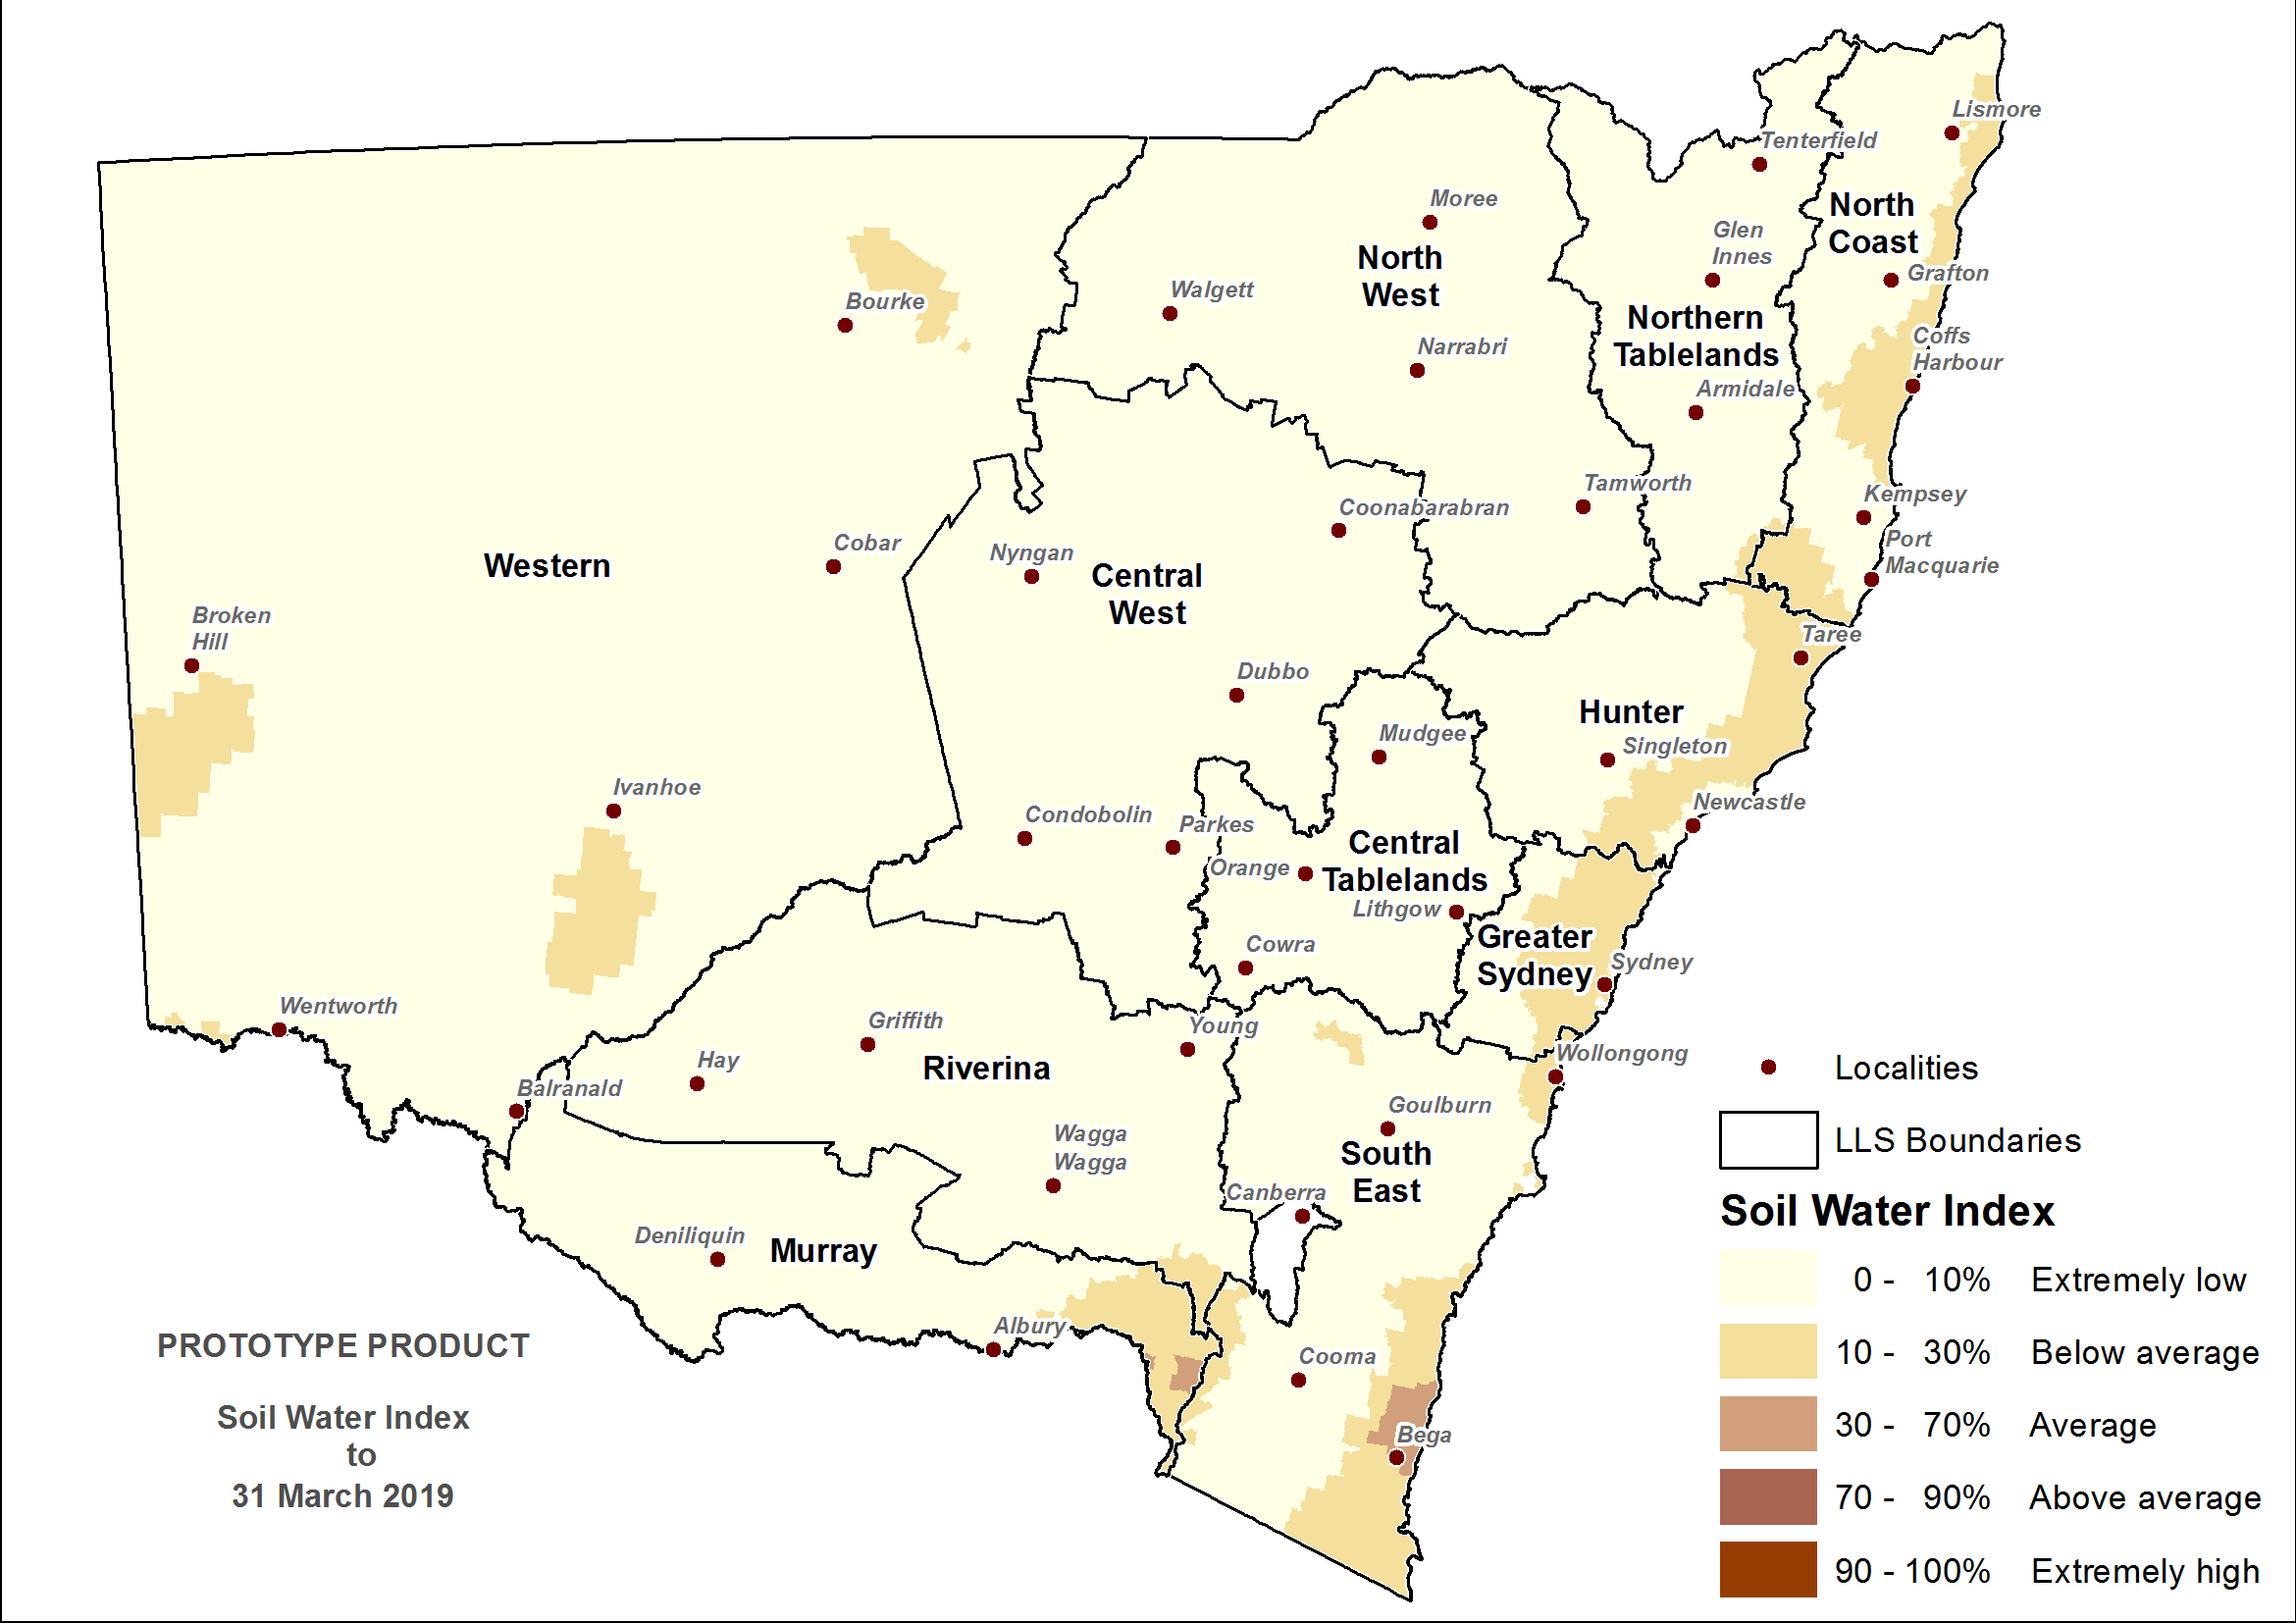 Soil Water Index (SWI) to 31 March 2019 - For an accessible explanation of this image contact scott.wallace@dpi.nsw.gov.au